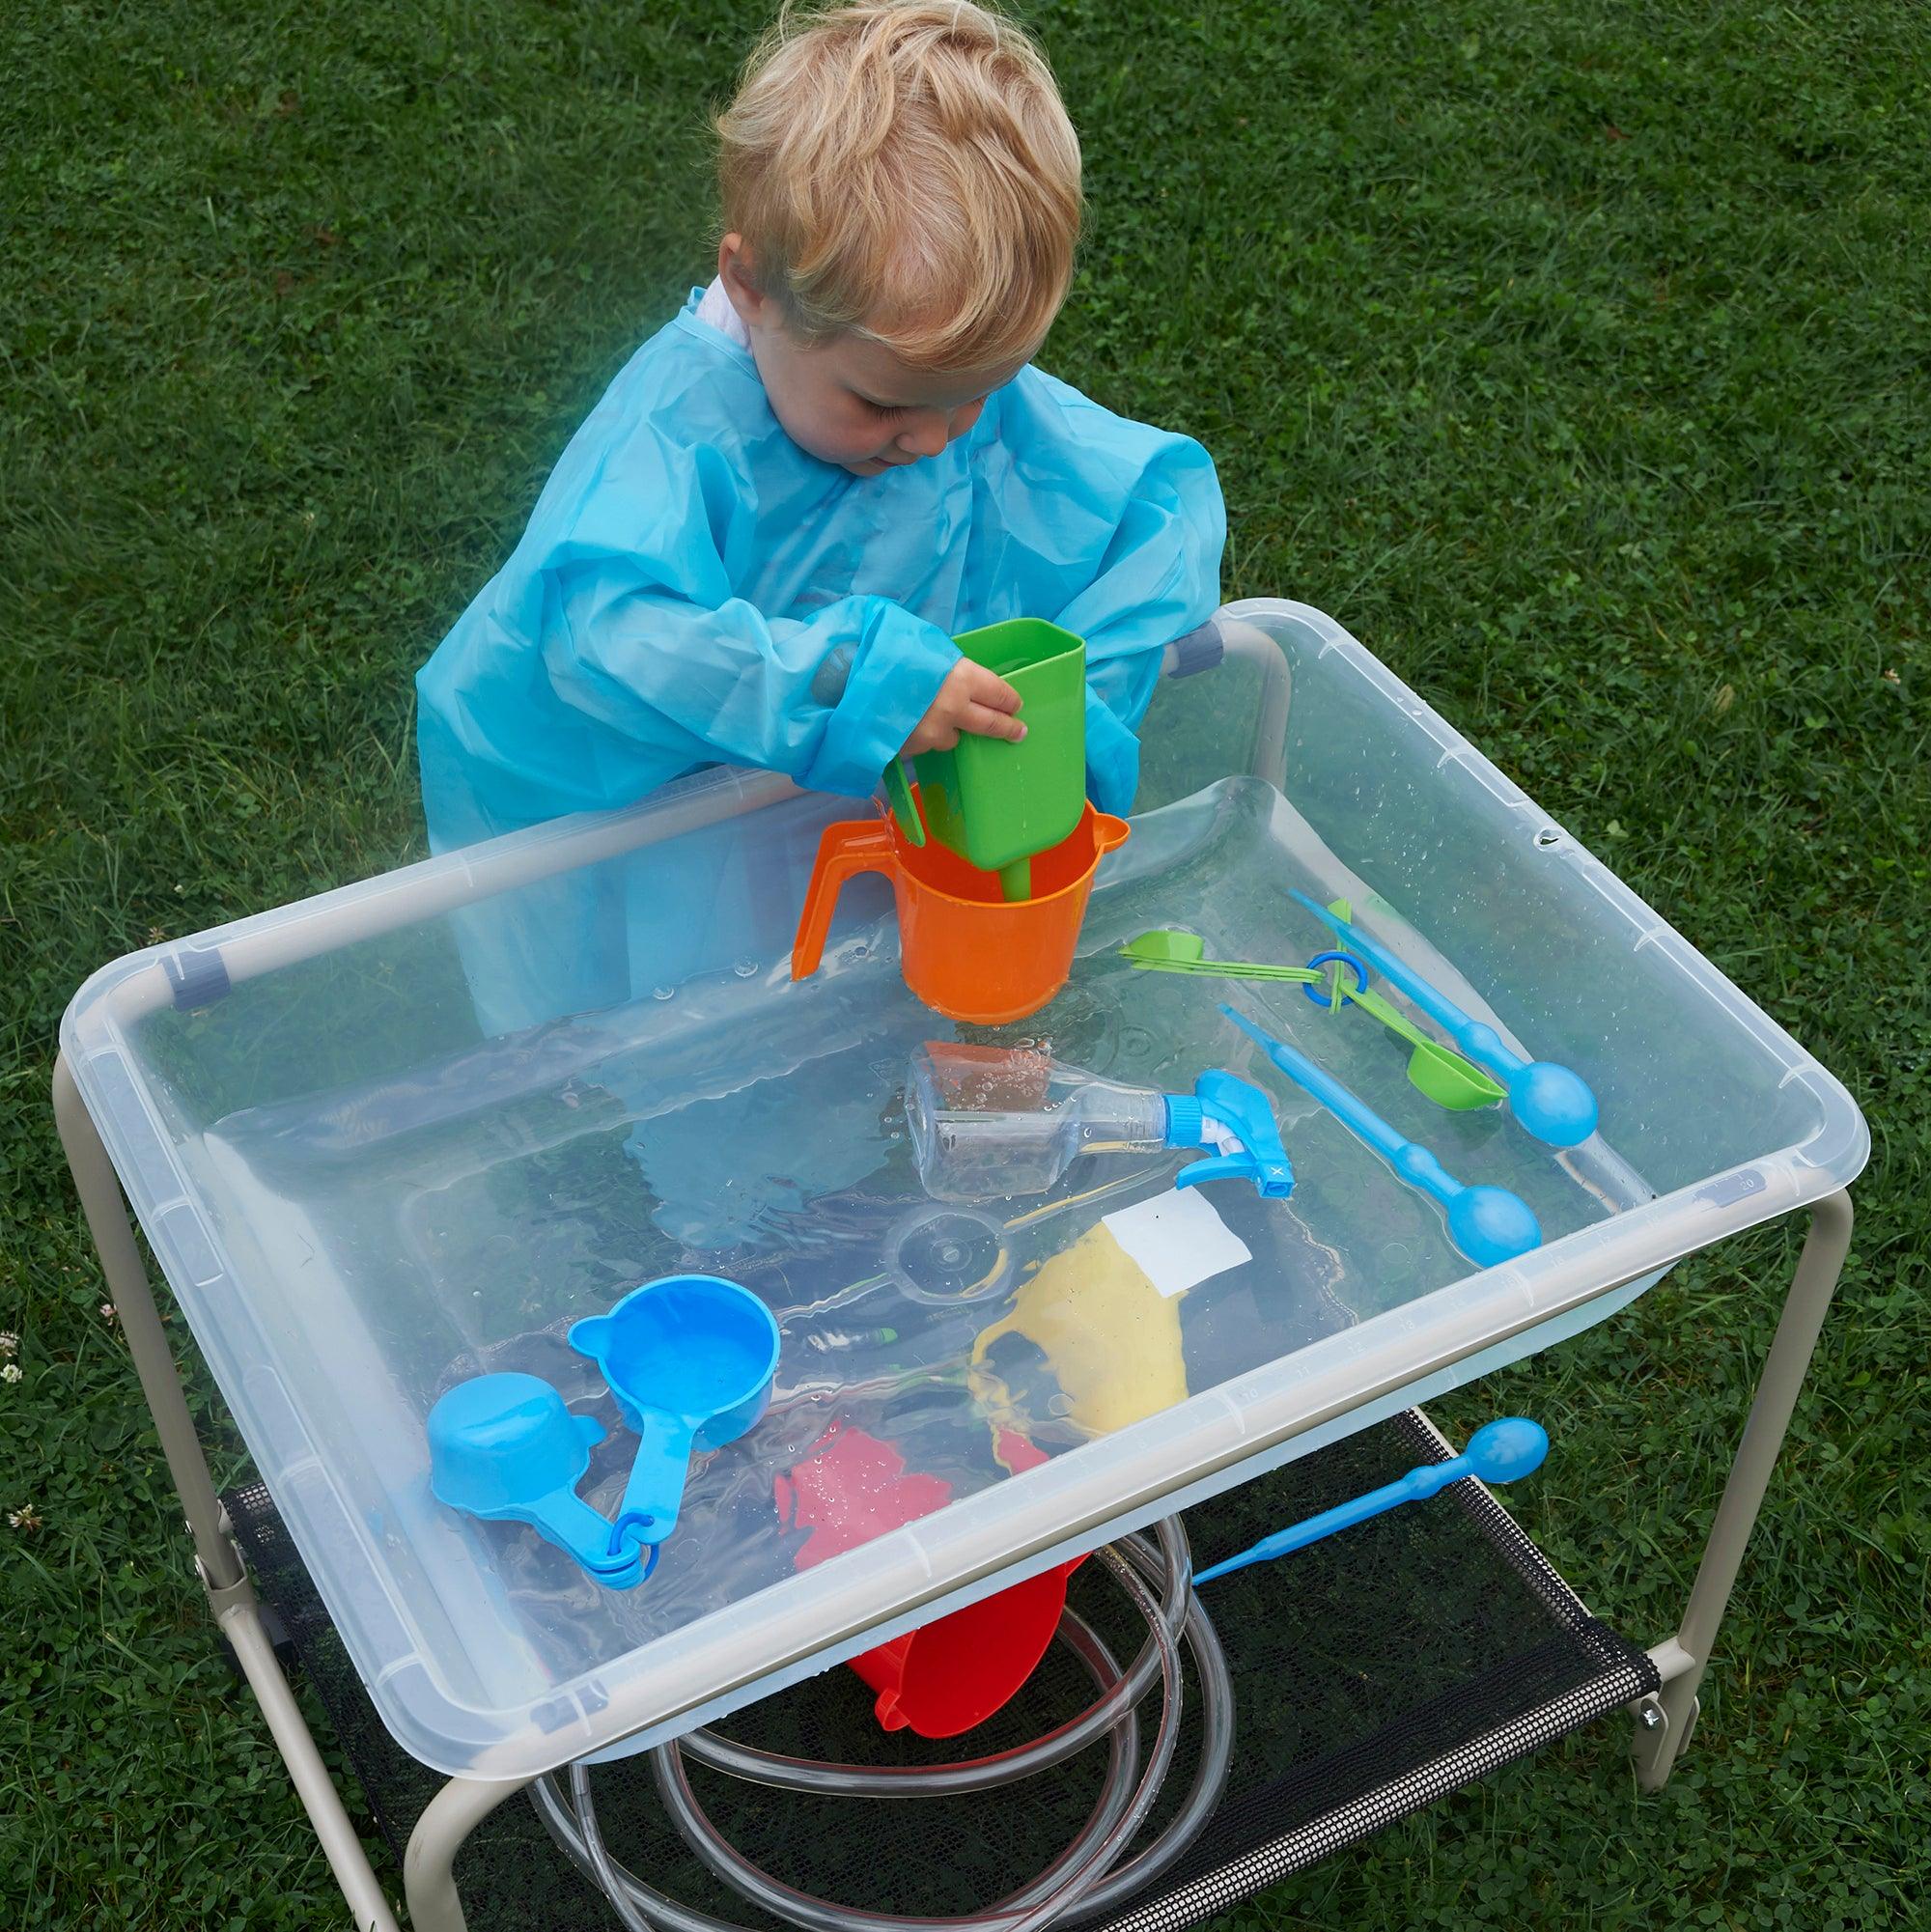 EDX Sand and Water Activity Set, Our edx education Sand & Water Activity Set is a great value accessory pack to accompany our Water Trays and Water Play Activity Rack, Your child will have hours of fun experimenting how different tactile materials can be measured and poured with cups, jugs and spoons and enjoy filling the spray bottles and pipettes with water. Why not add a drop of food colouring to the water and create a colourful water tube with the funnels and hose. The possibilities for imaginative play